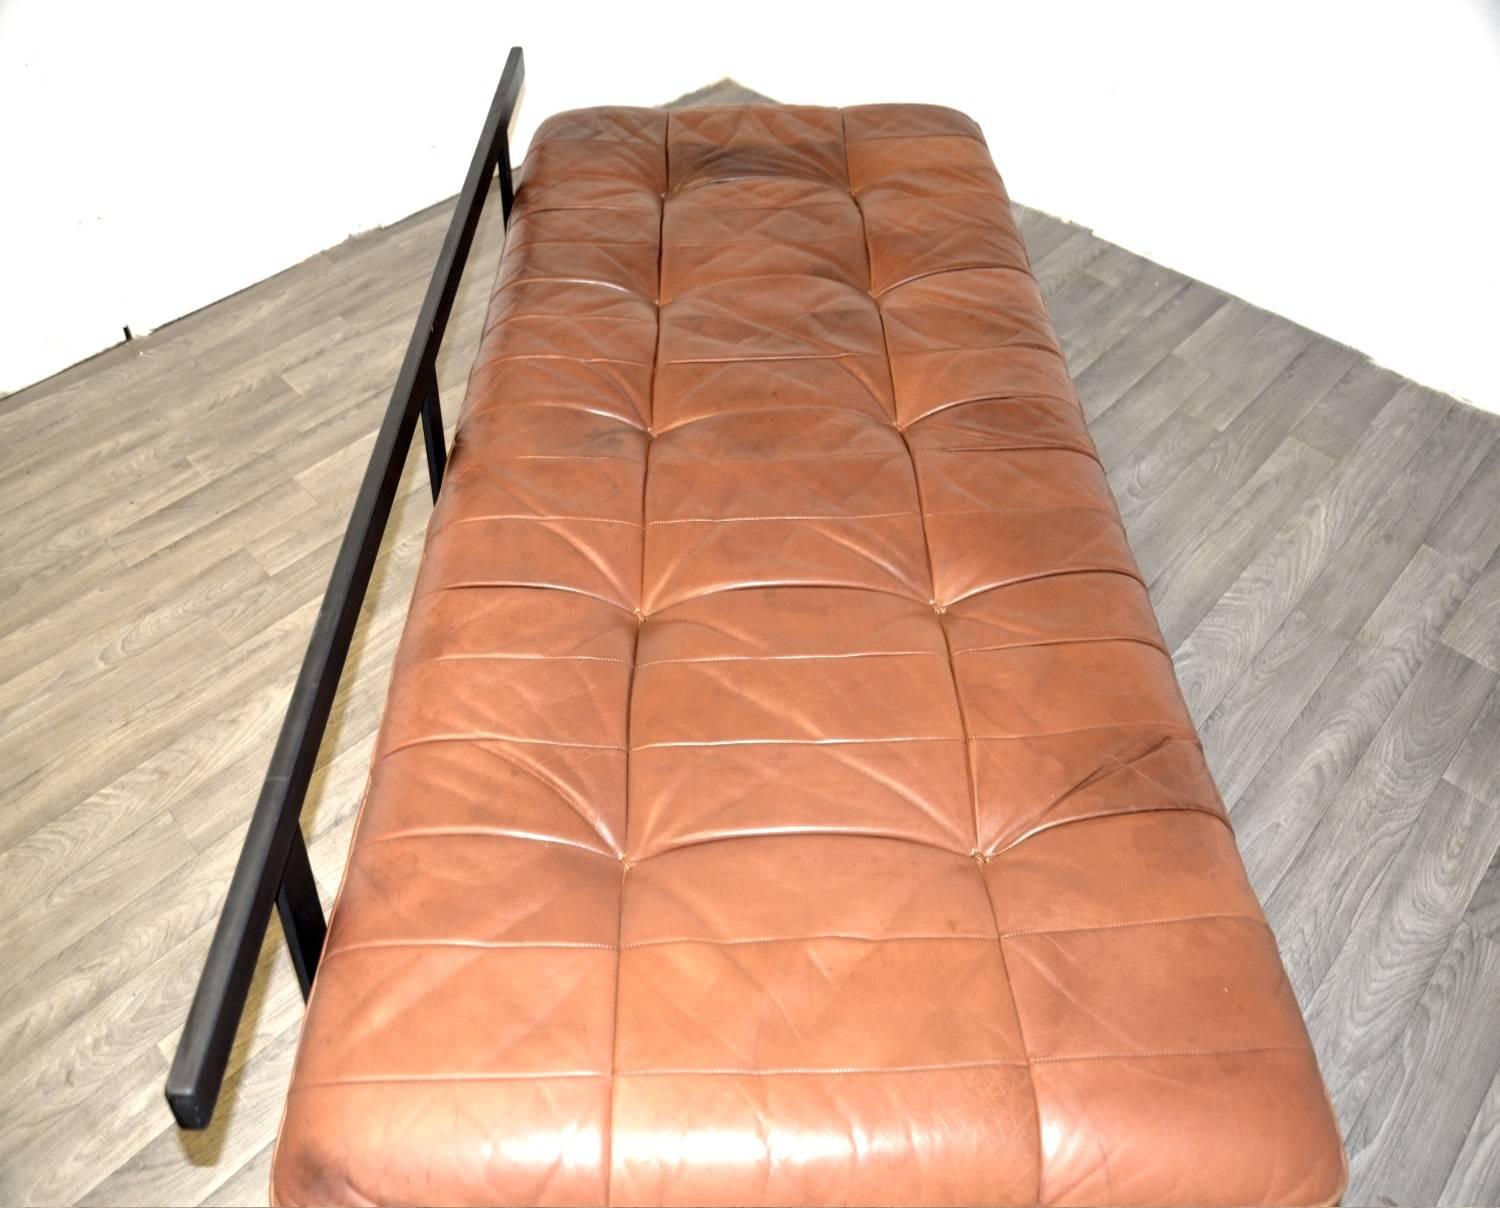 Vintage Swiss De Sede DS 80 Leather Daybed, 1960s For Sale 4